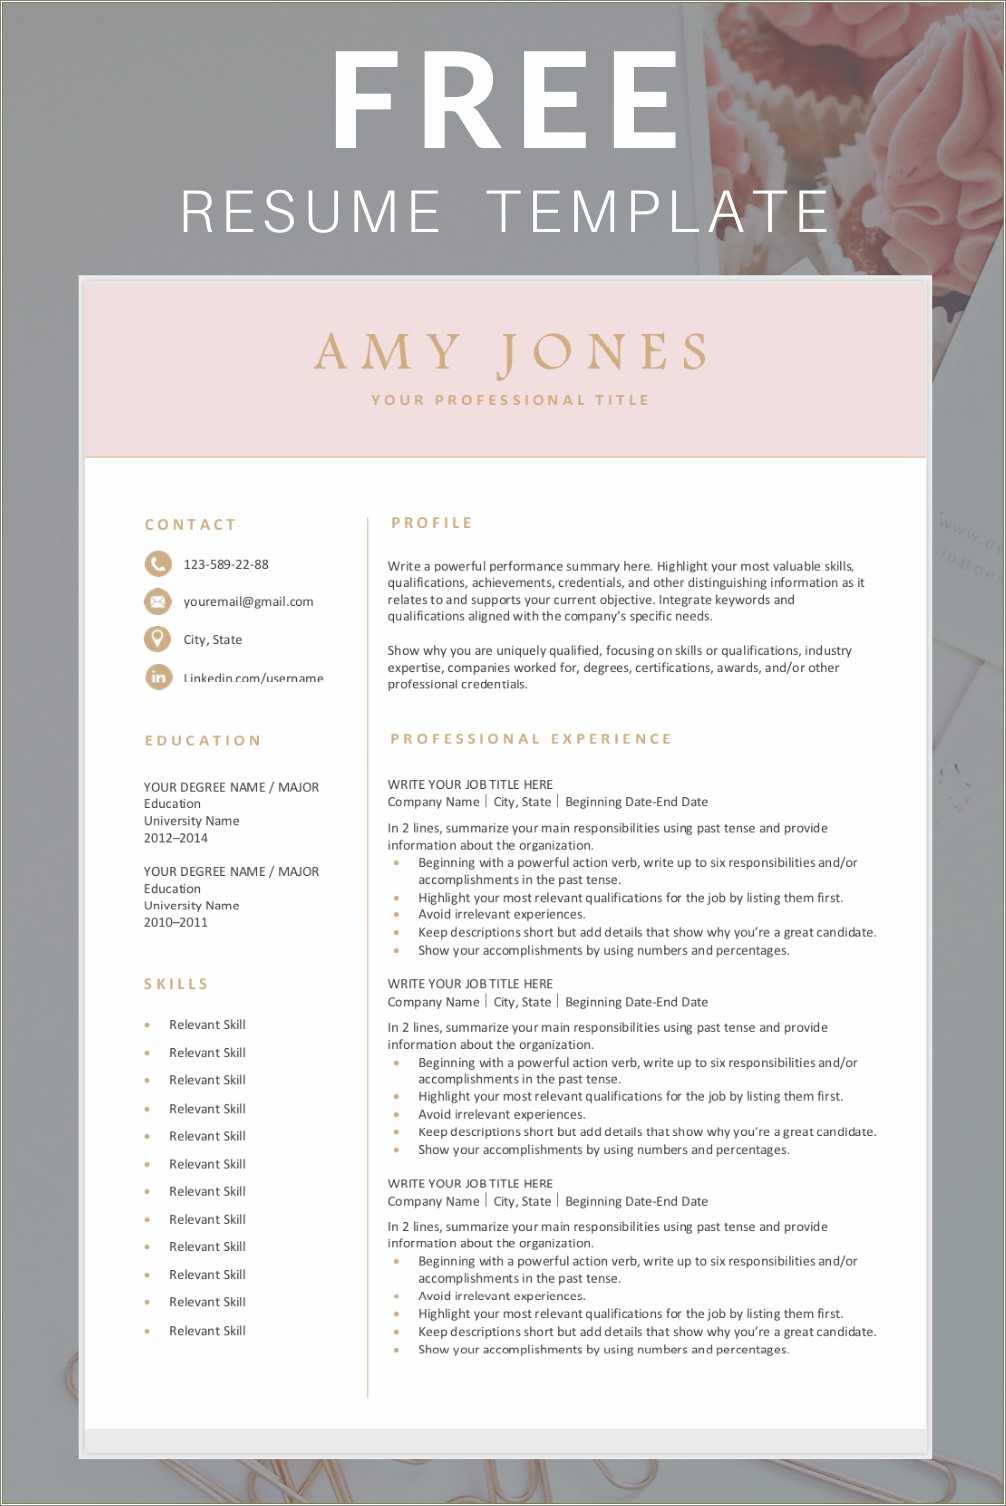 free-downloadable-resume-pdf-templates-resume-example-gallery